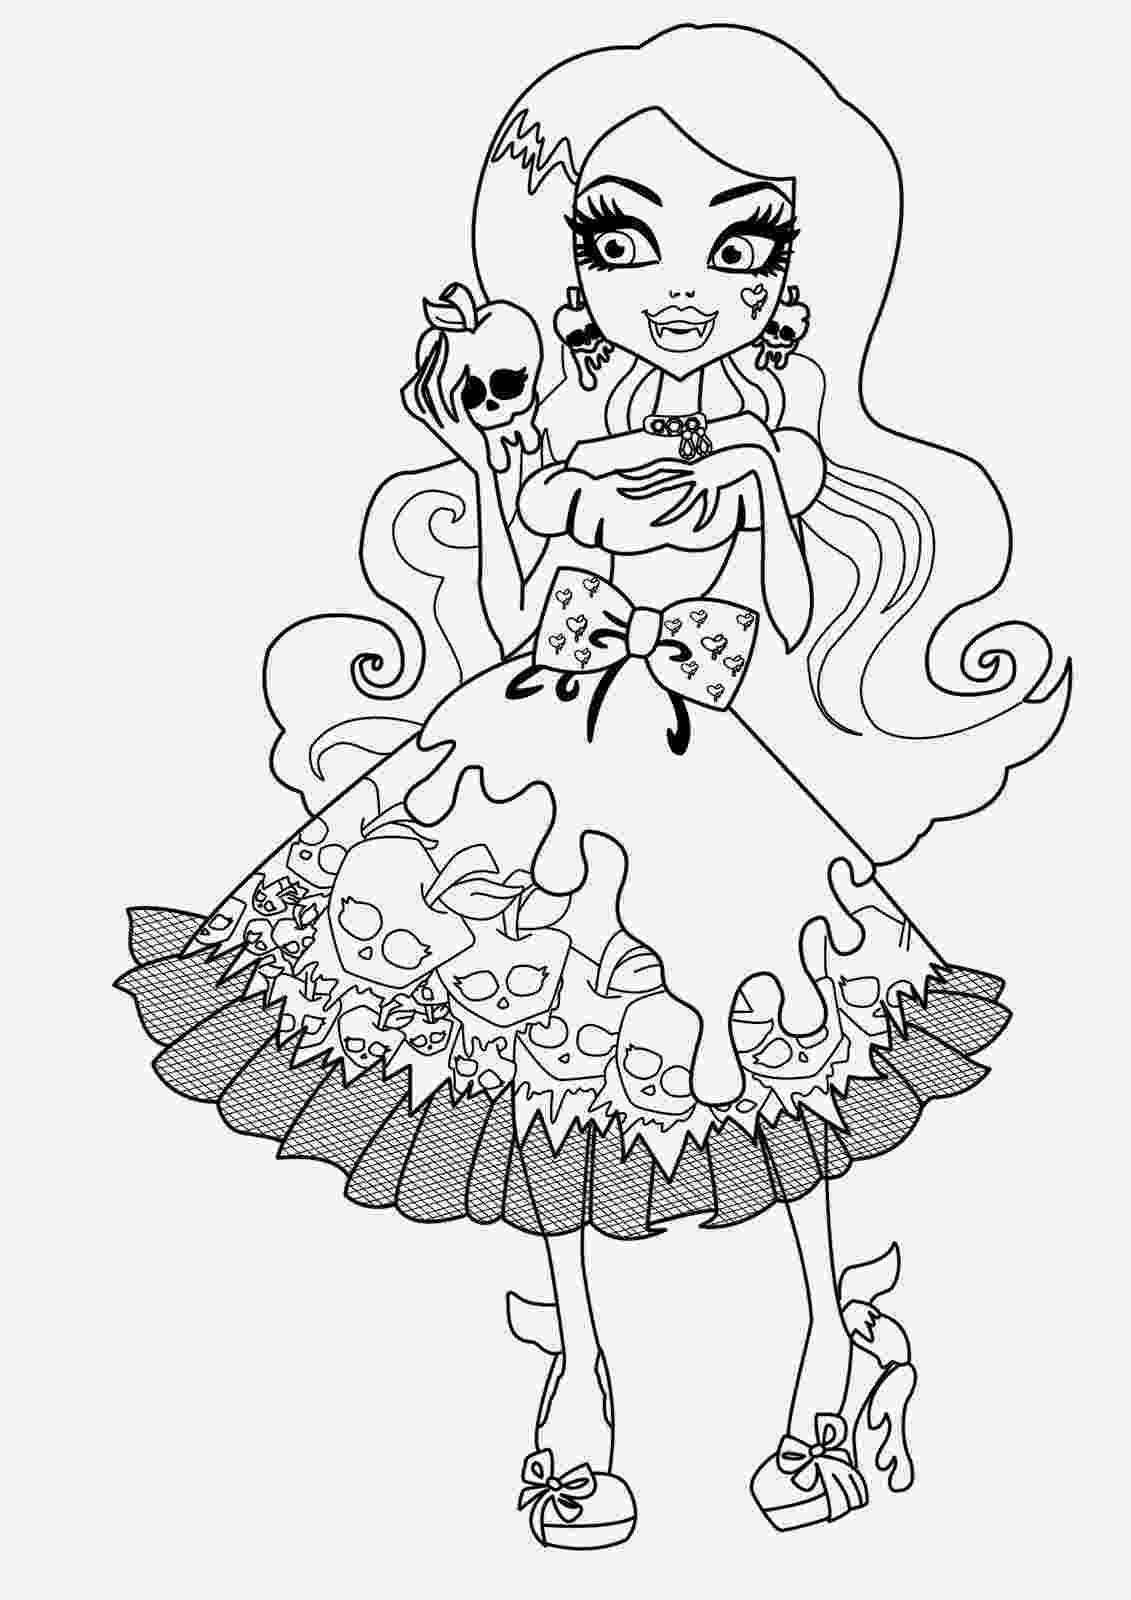 monster high coloring pages for free top 27 monster high coloring pages for your little ones pages high for free monster coloring 